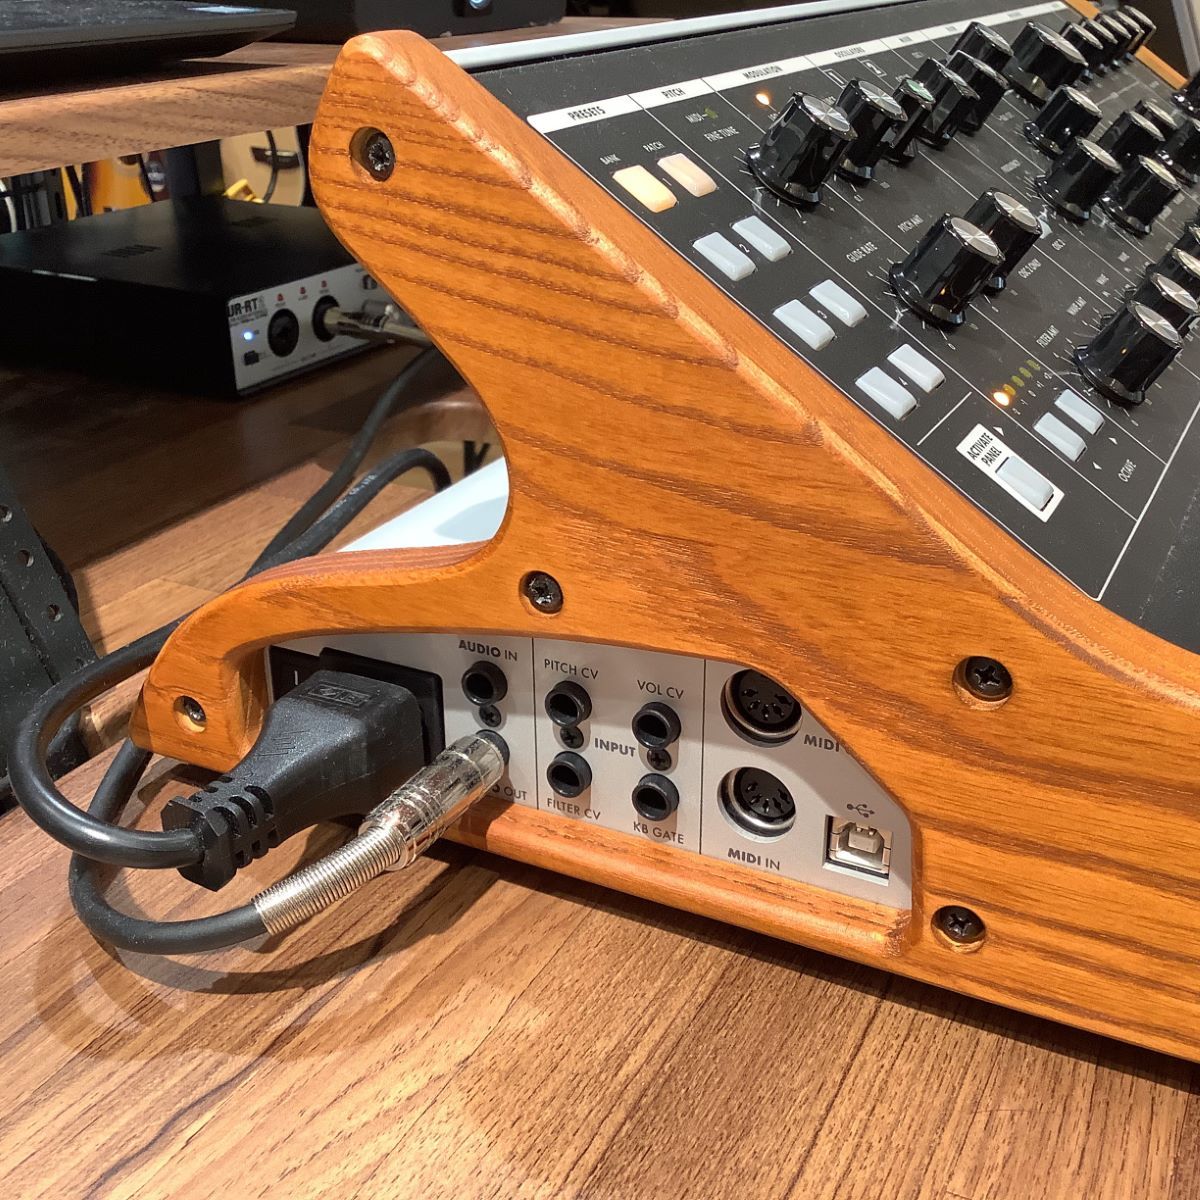 Moog Subsequent 25 パラフォニックアナログシンセサイザー 25鍵盤